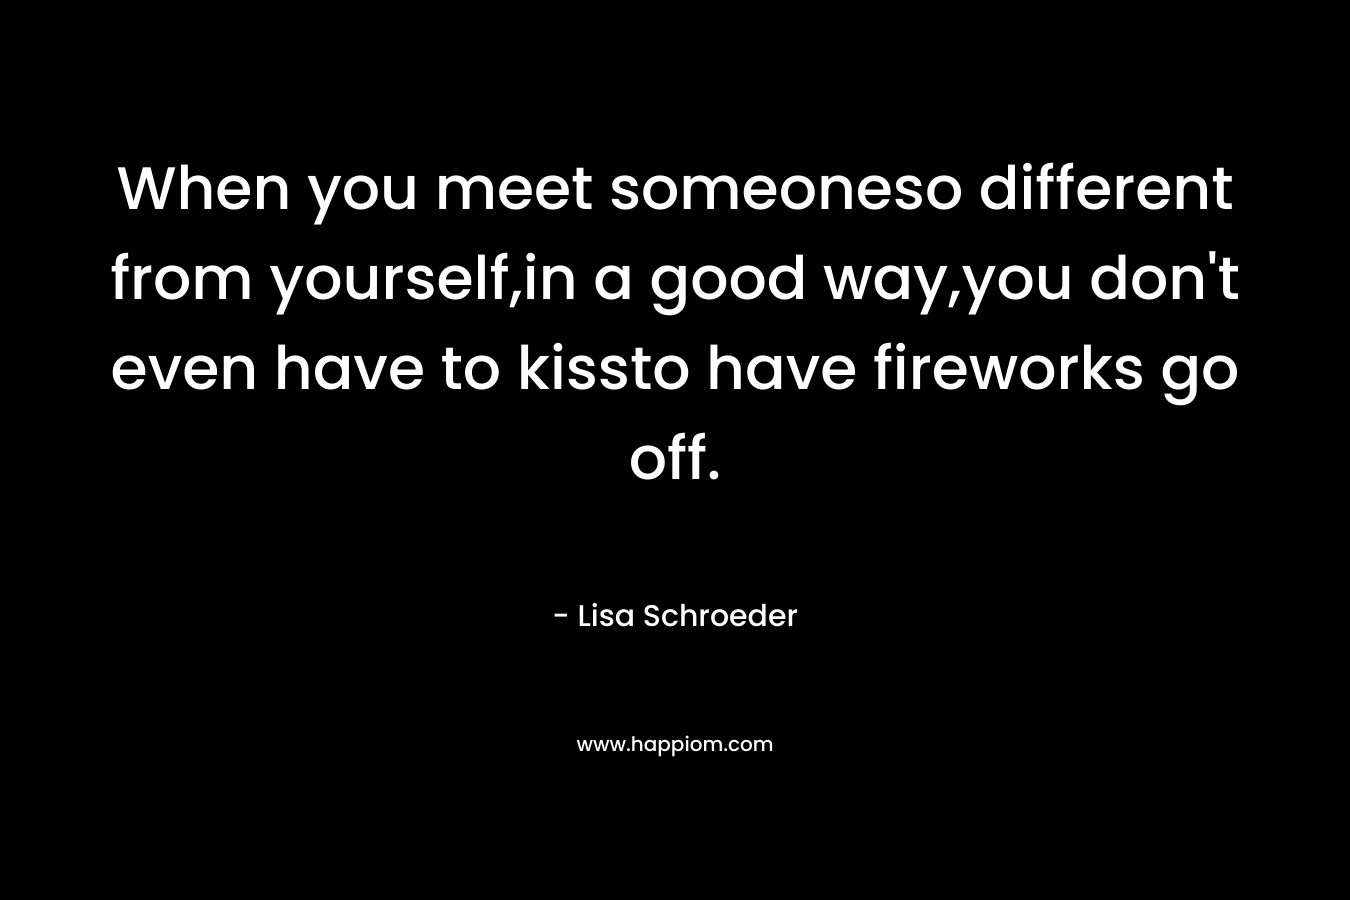 When you meet someoneso different from yourself,in a good way,you don’t even have to kissto have fireworks go off. – Lisa Schroeder